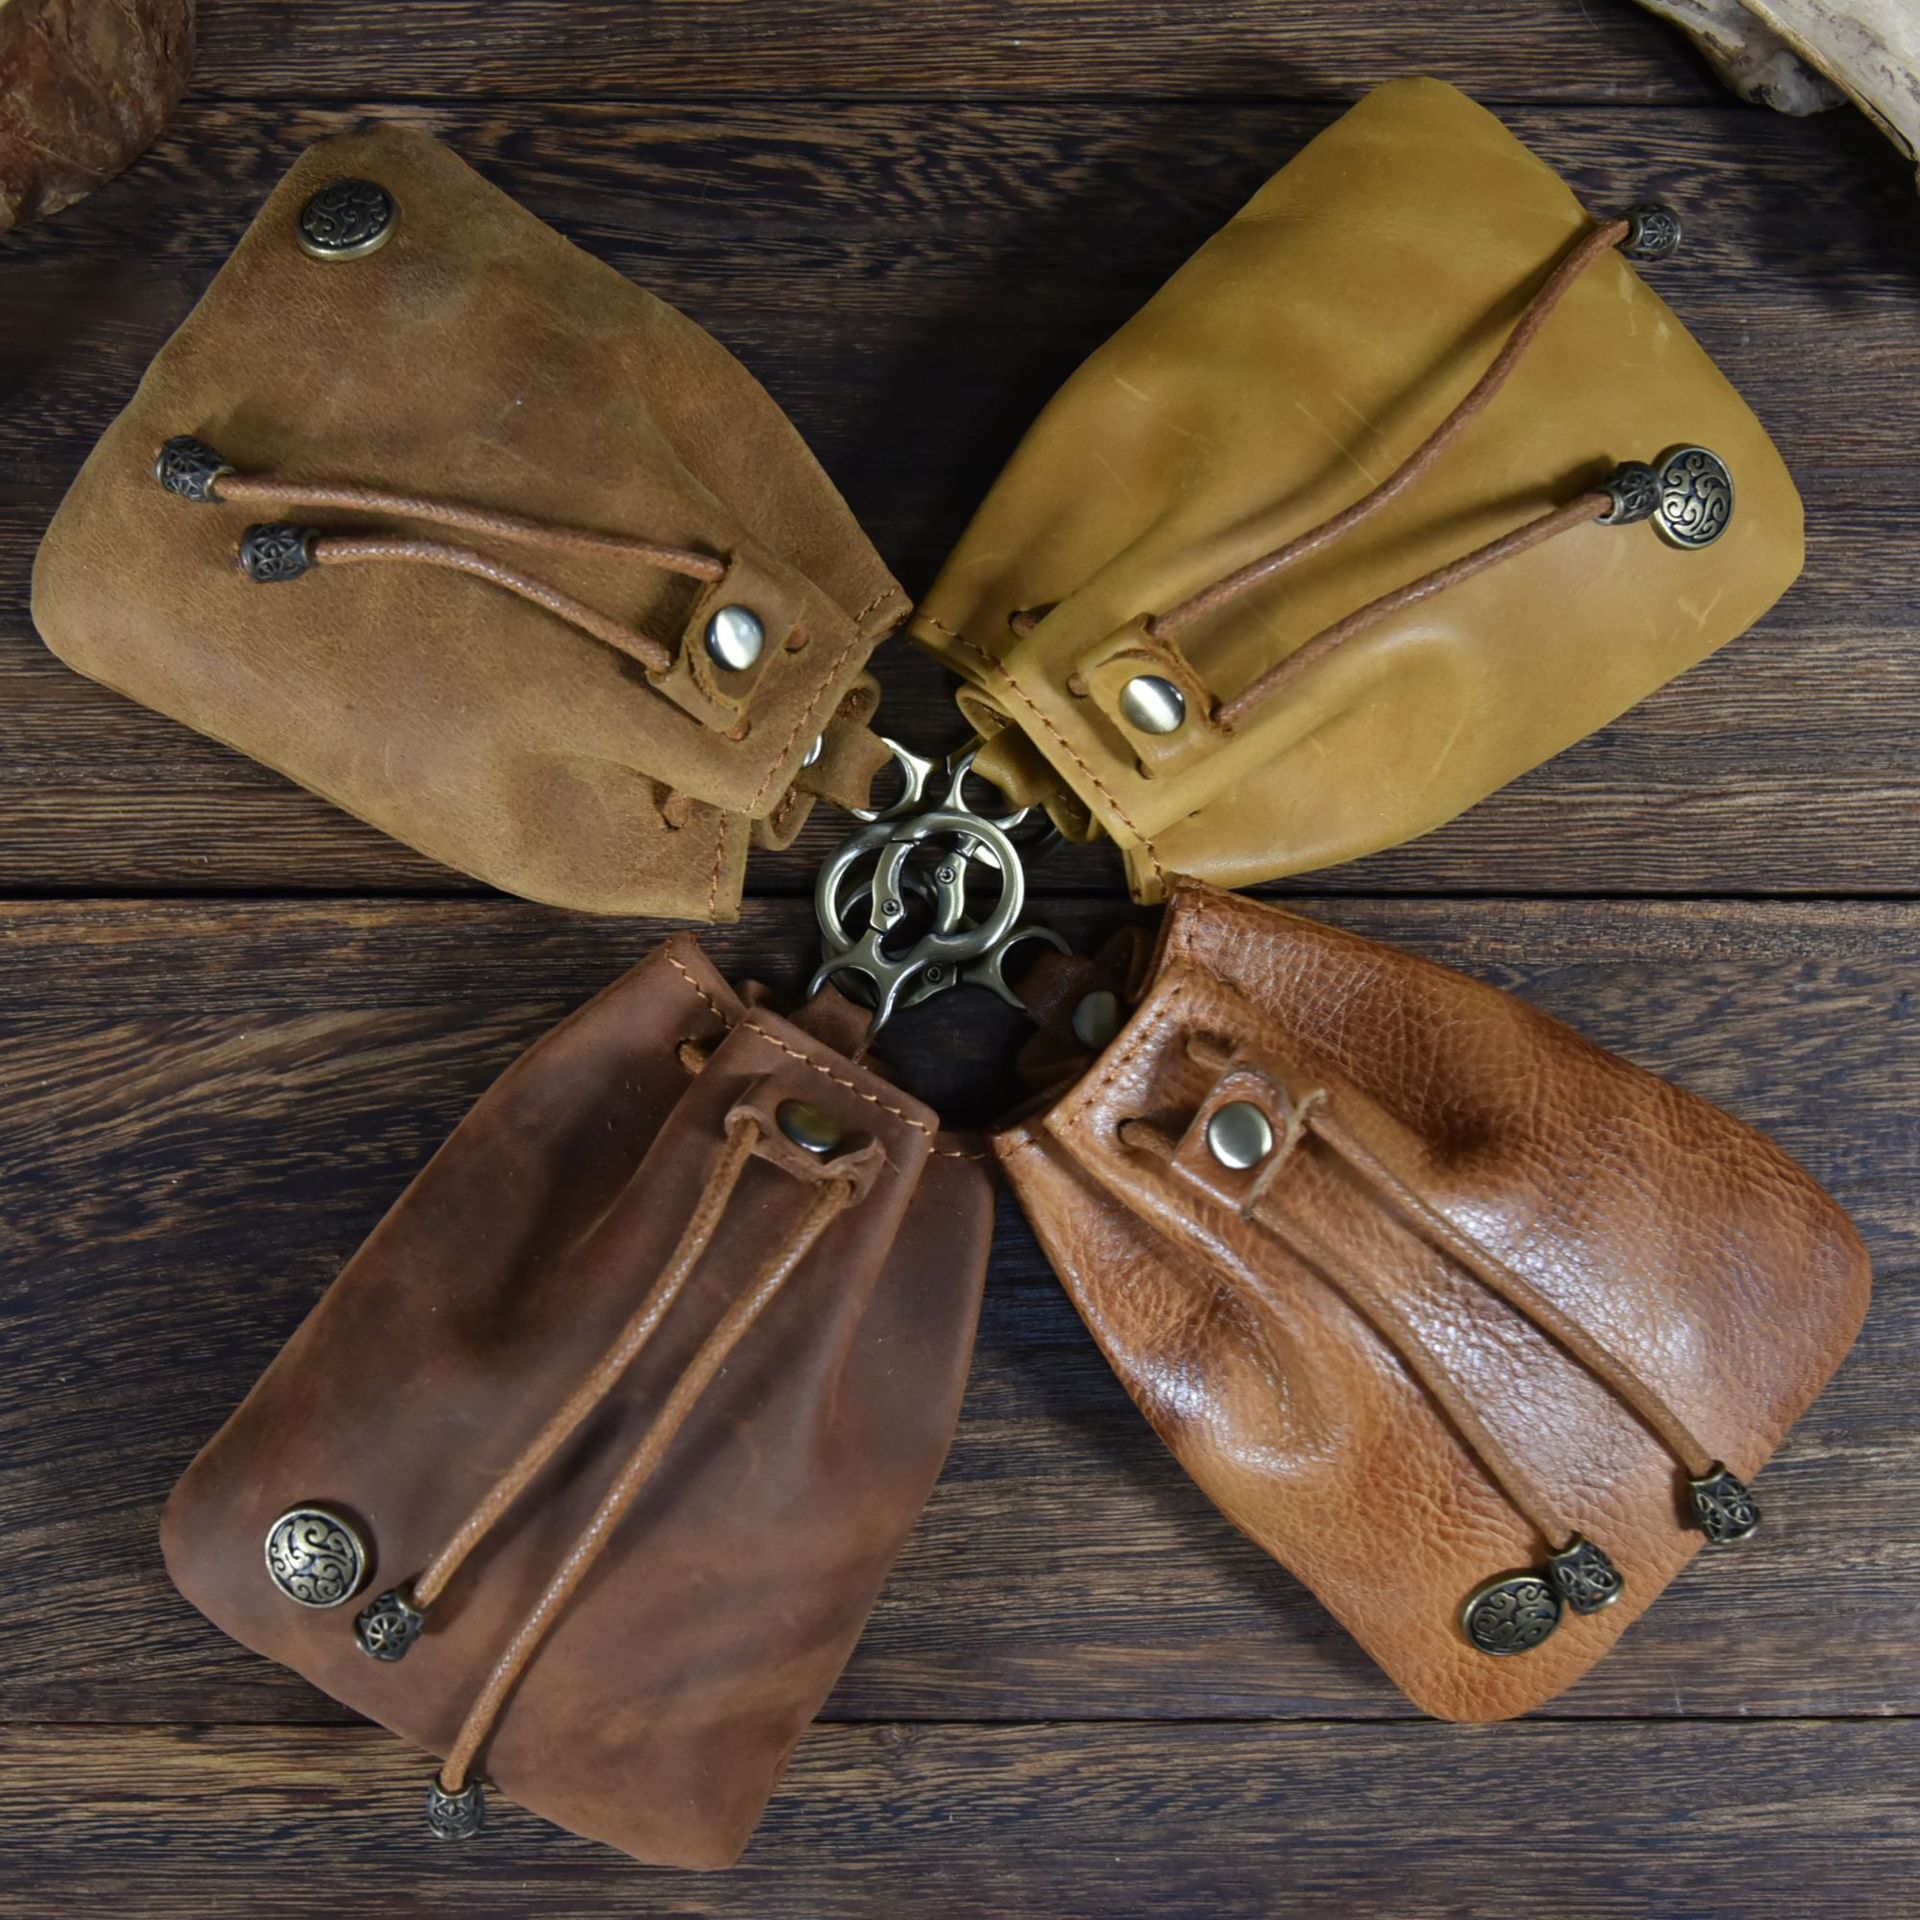 Genuine Leather Coin Purse For Men Male Vintage Original Cowhide Small Drawstring Bag Coin Pouch Key Card Holder Keychain Wallet